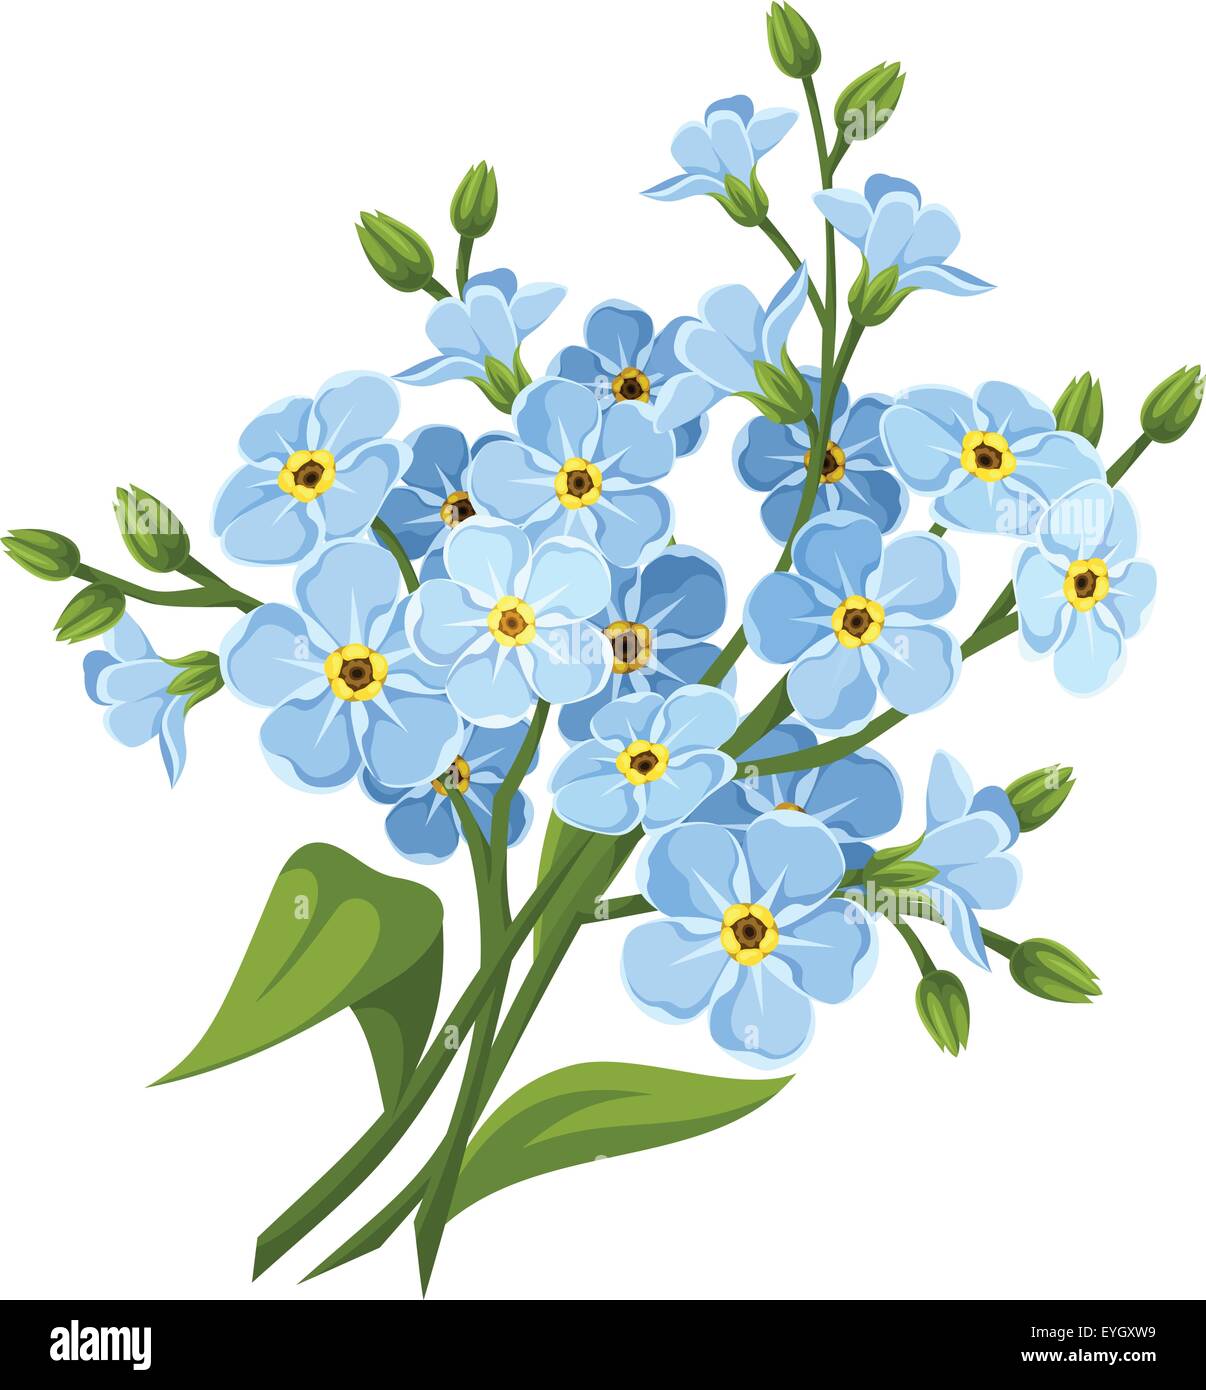 Blue forget-me-not flowers. Vector illustration Stock Vector Image